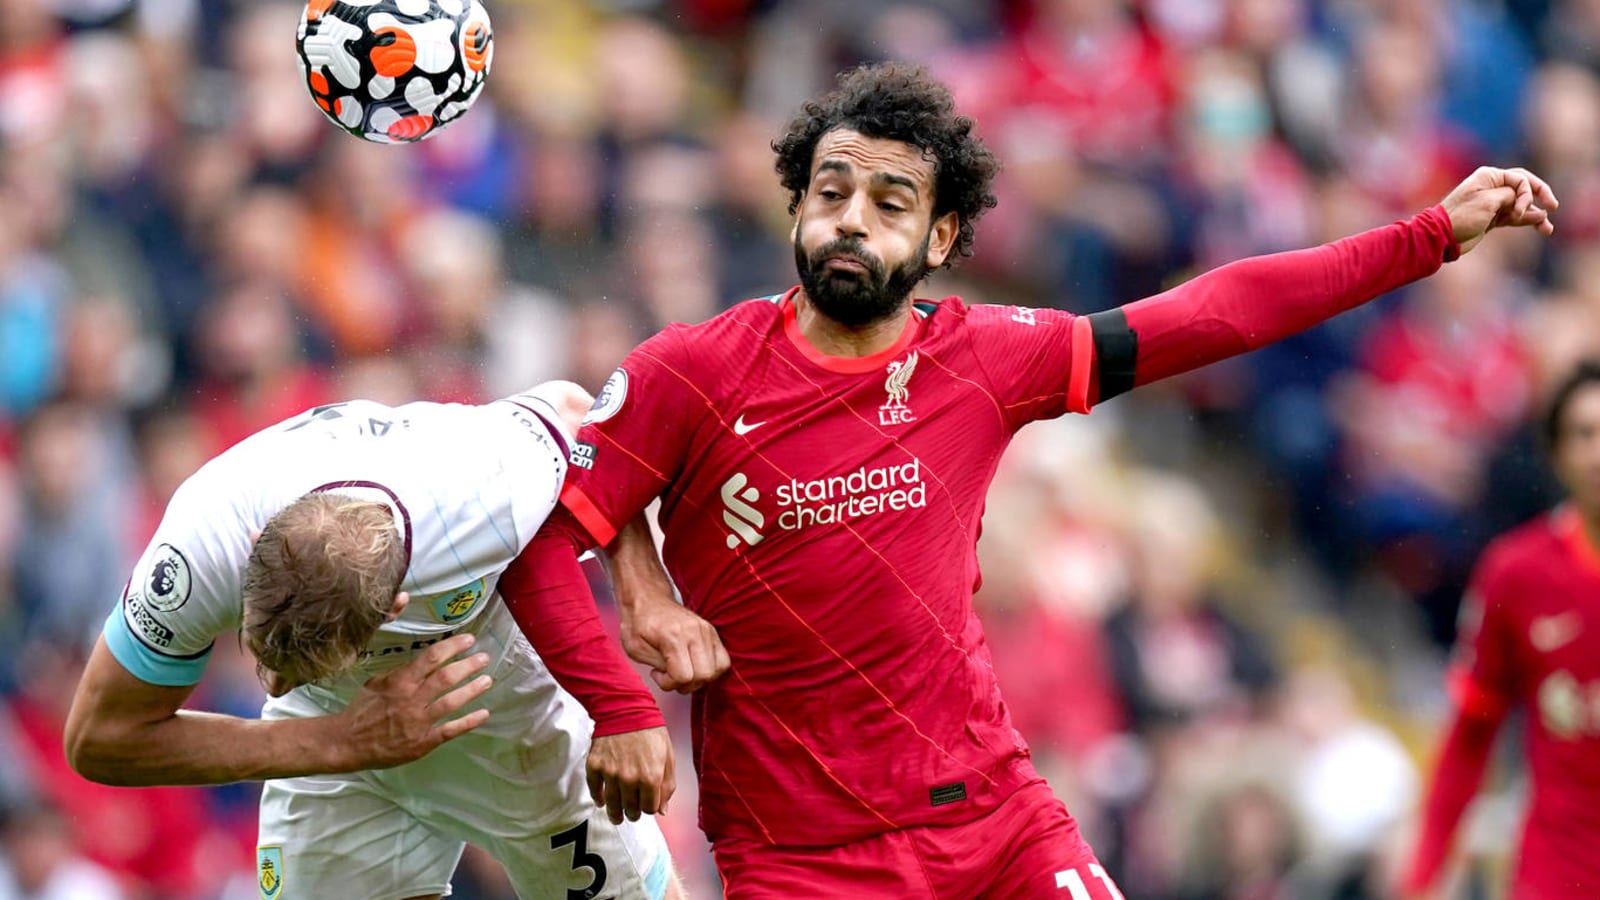 Liverpool won't allow Salah to play in World Cup qualifiers